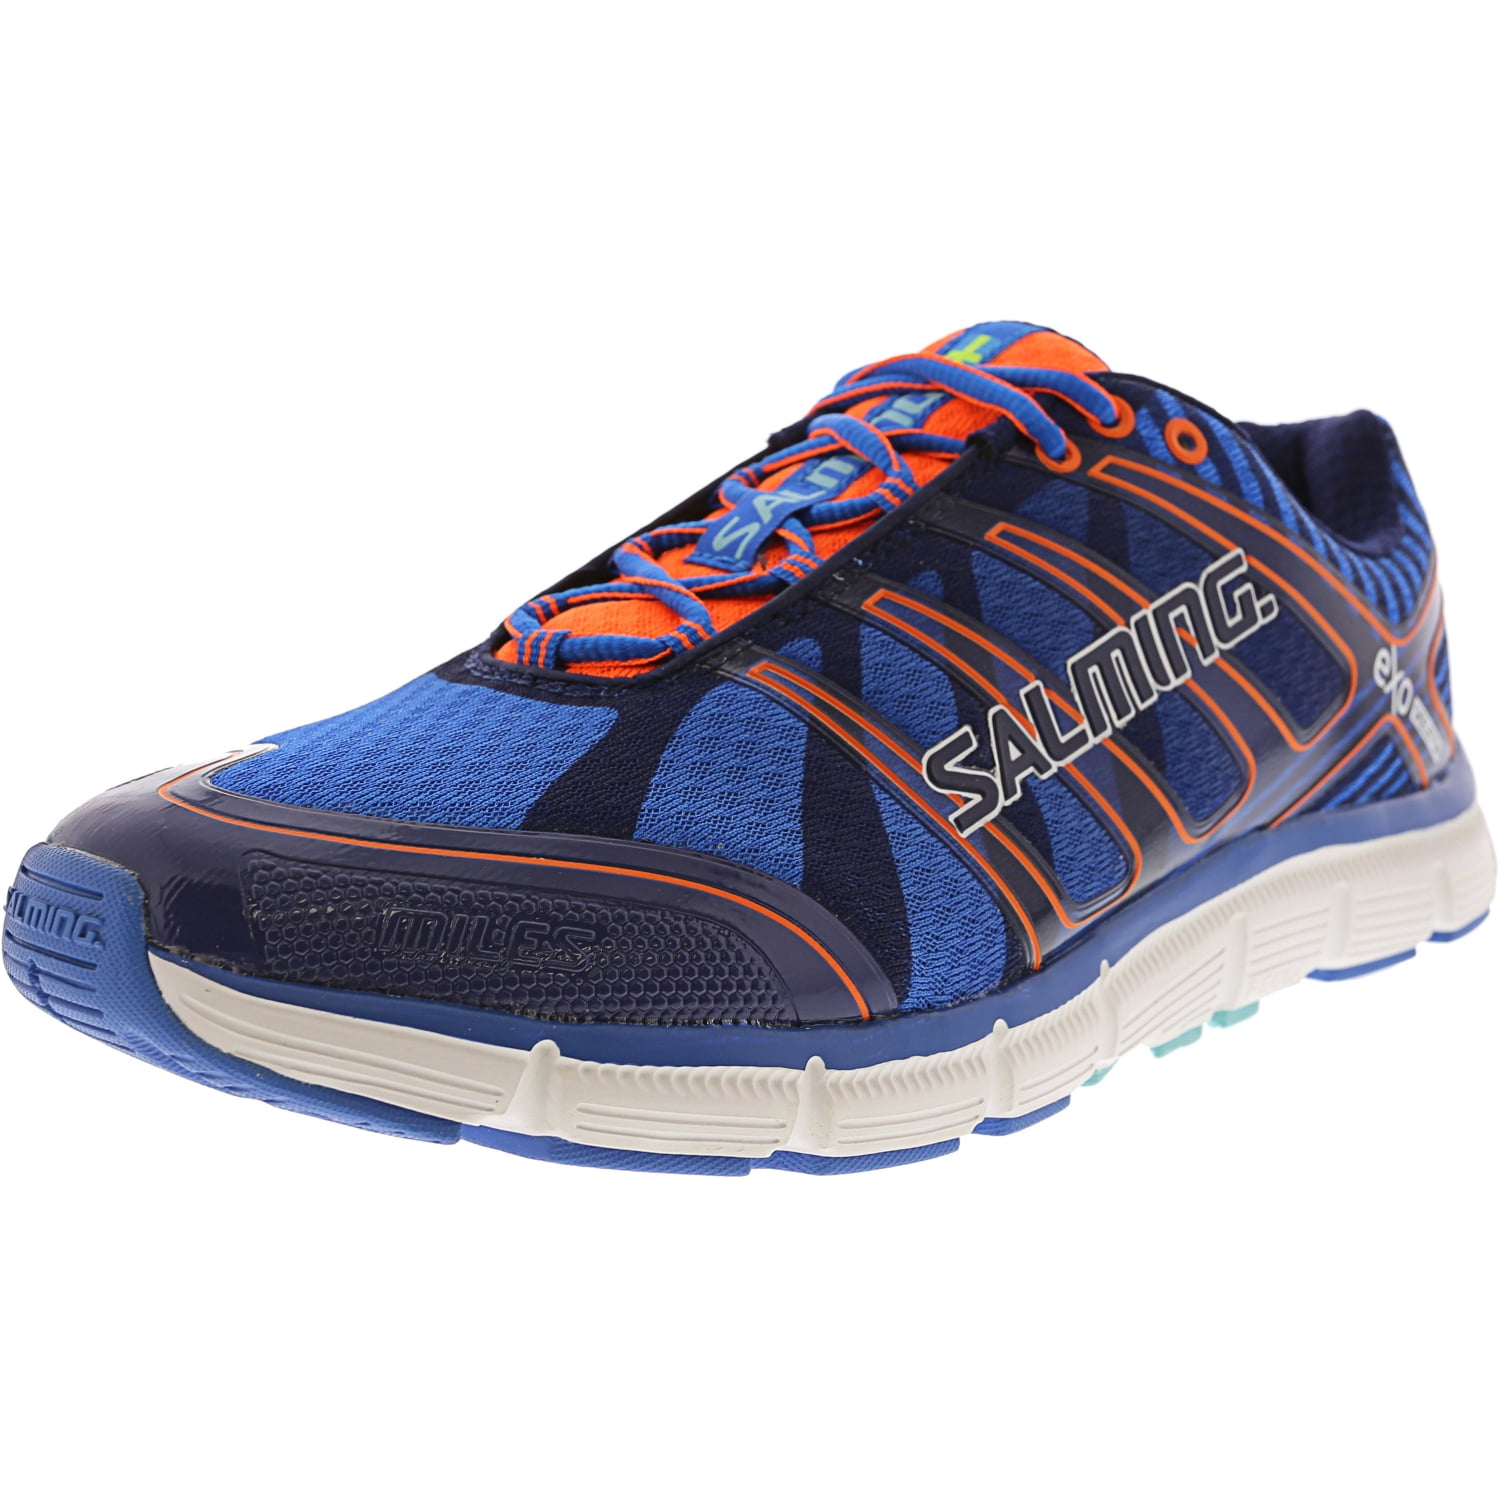 Salming Elements Mens Trail Running Shoes Blue 